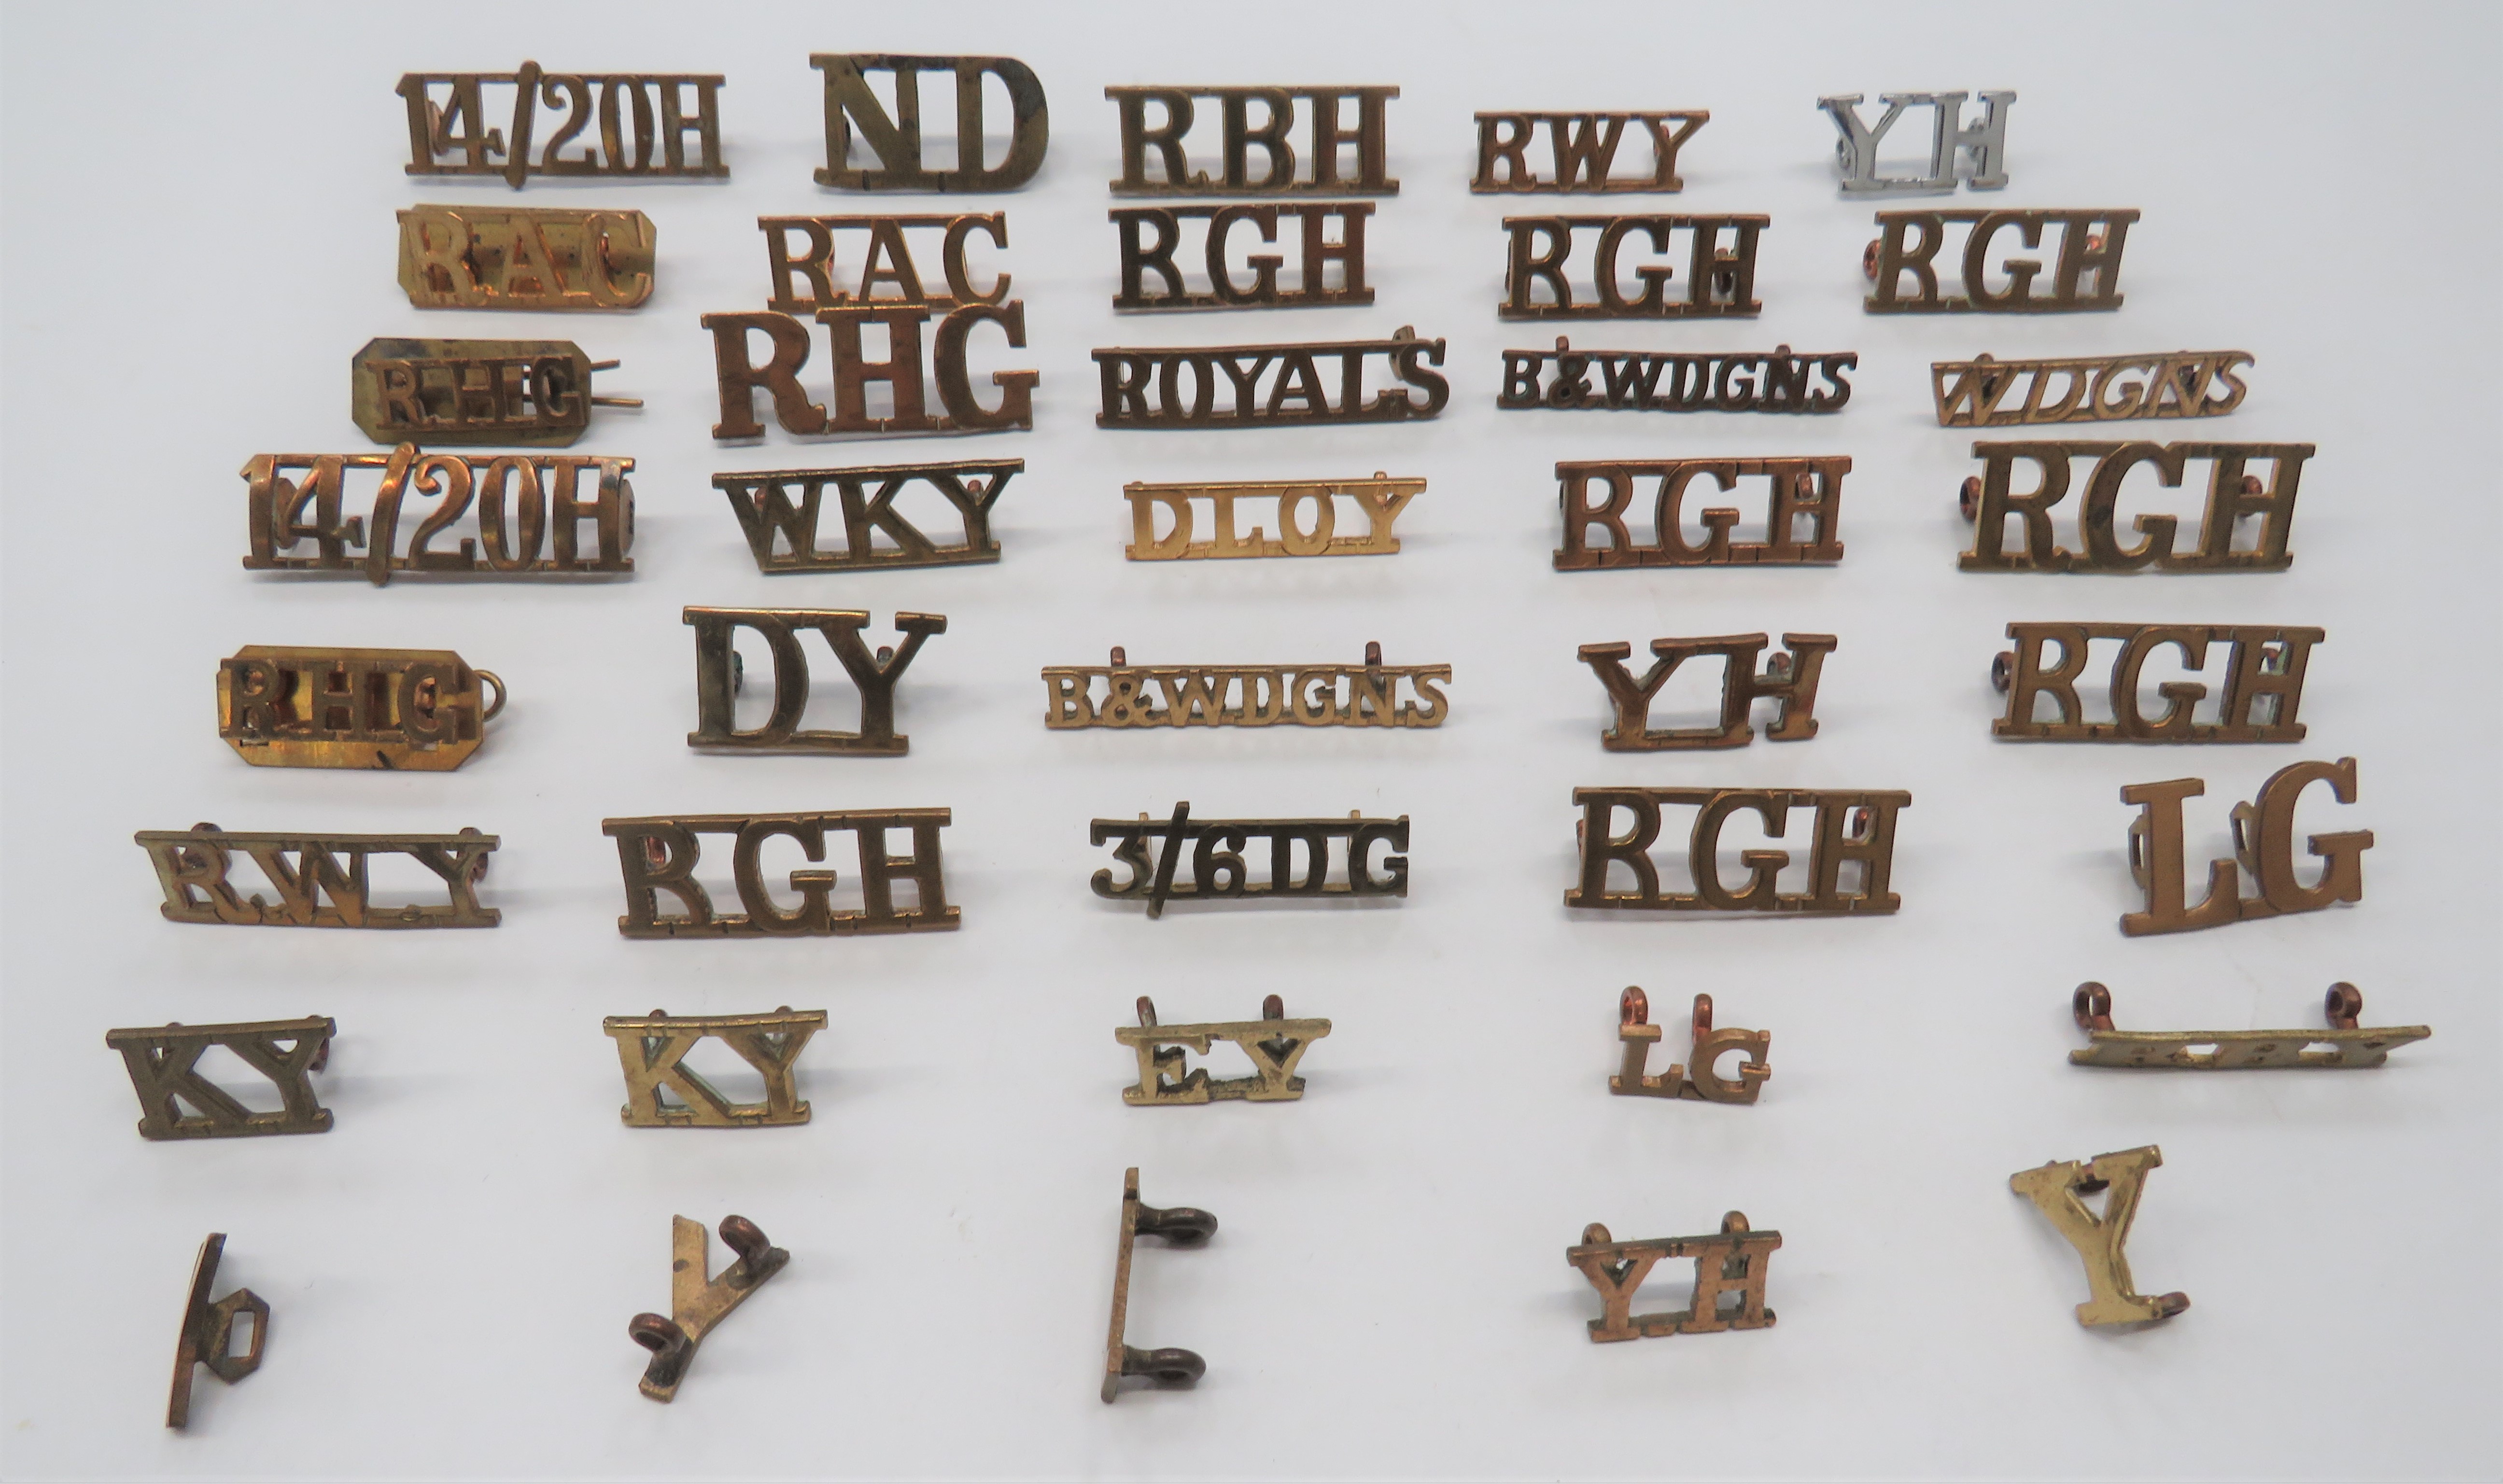 40 x Yeomanry & Cavalry Brass Shoulder Titles including ND ... RWY ... DLOY ... W DGNS ... WKY ...